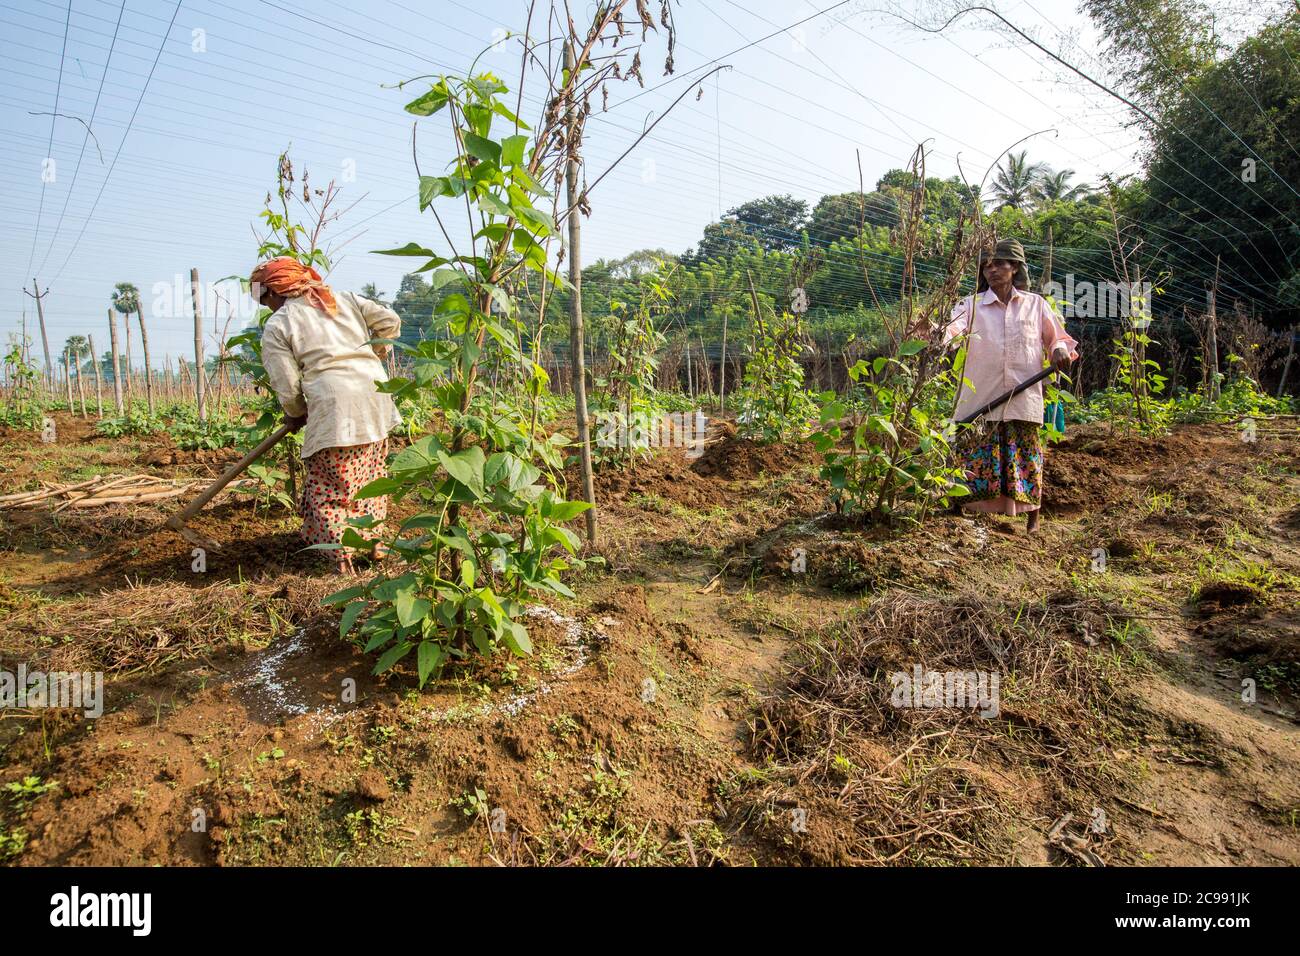 indian agriculture,kerala agriculture,palakad paddy field,indian farmer,indian cultivation,farmer india,farming Stock Photo